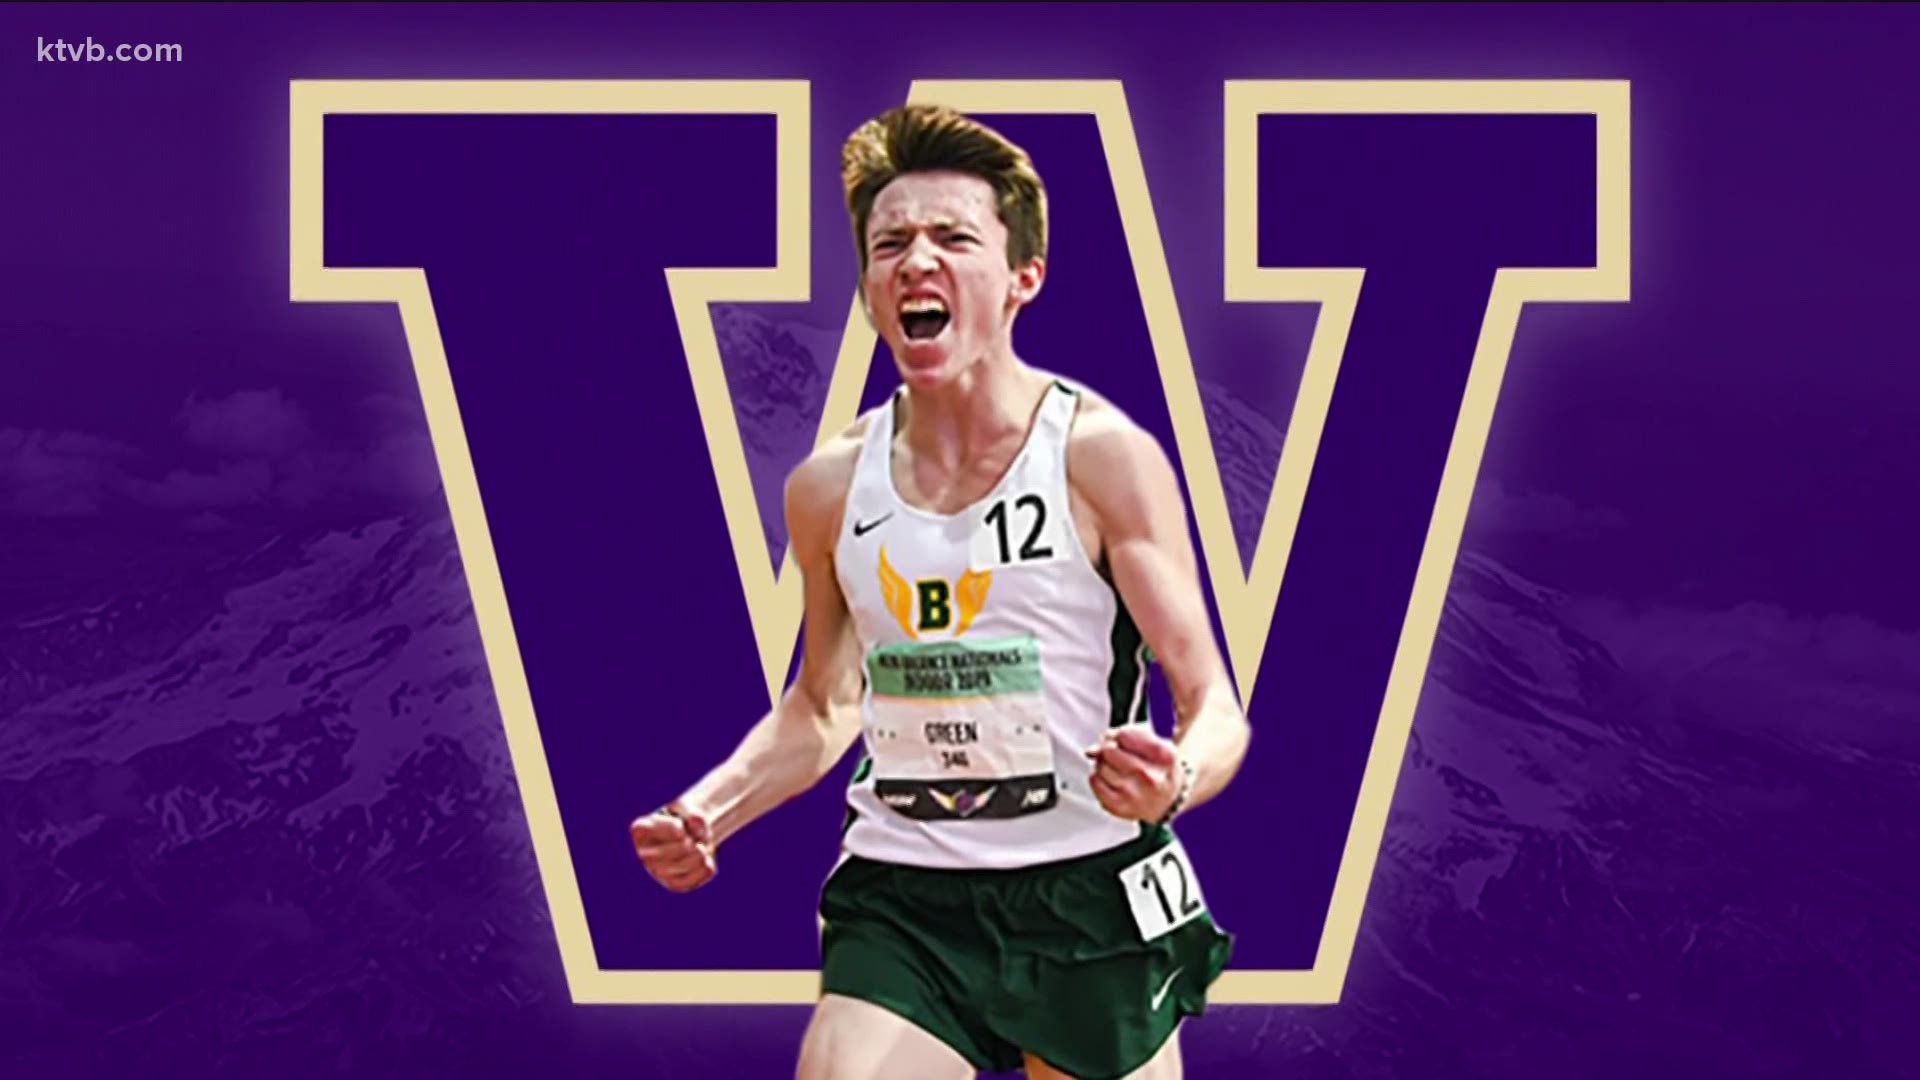 Borah High School senior Nathan Green explains why he chose to commit to the University of Washington's cross country & track program